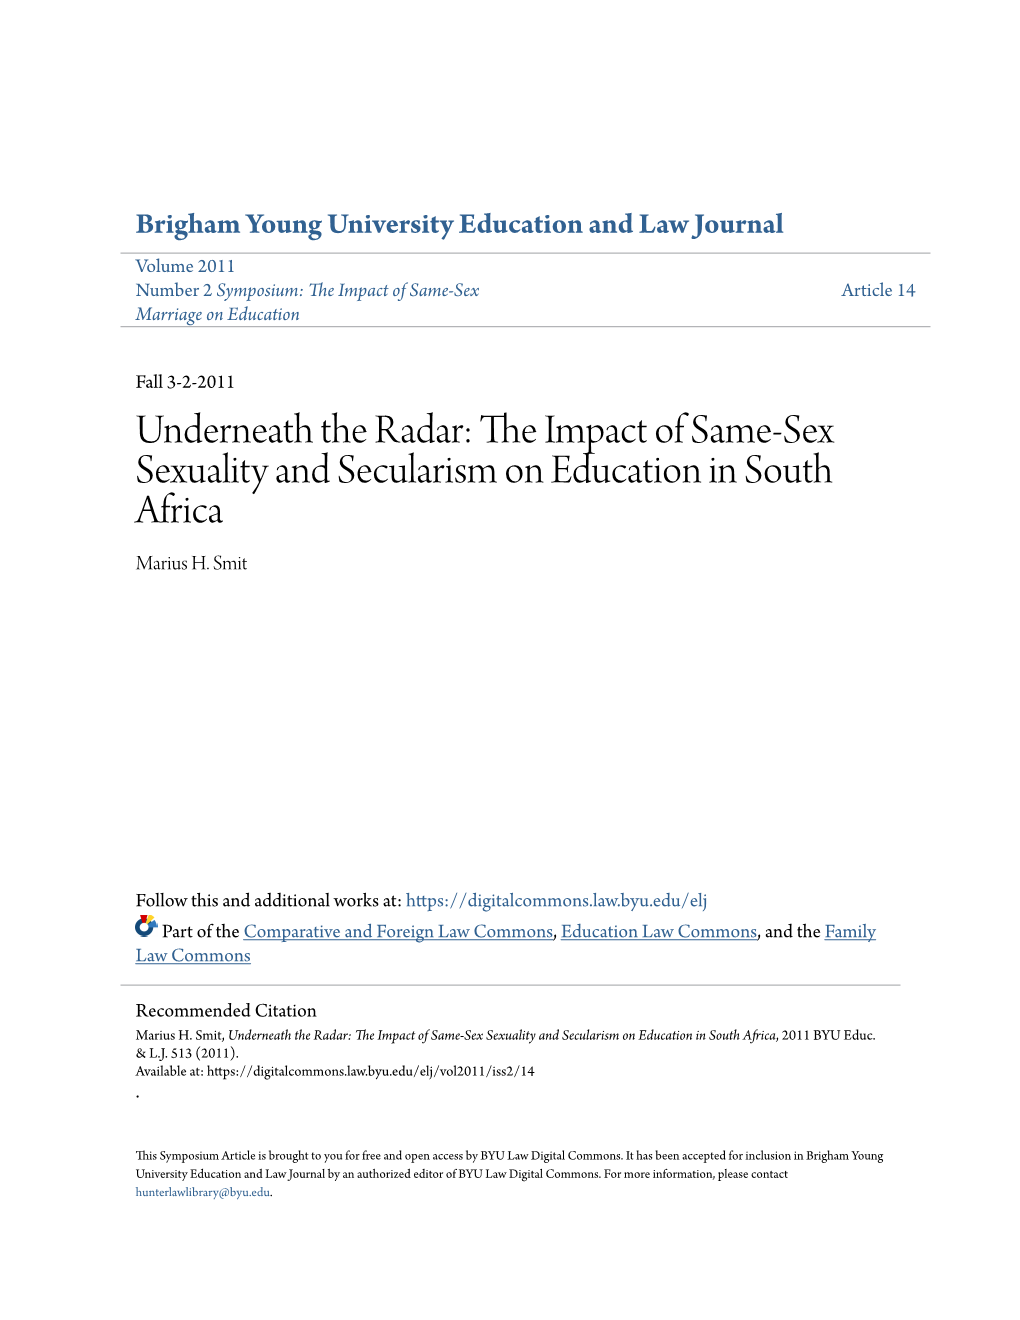 The Impact of Same-Sex Sexuality and Secularism on Education in South Africa, 2011 BYU Educ